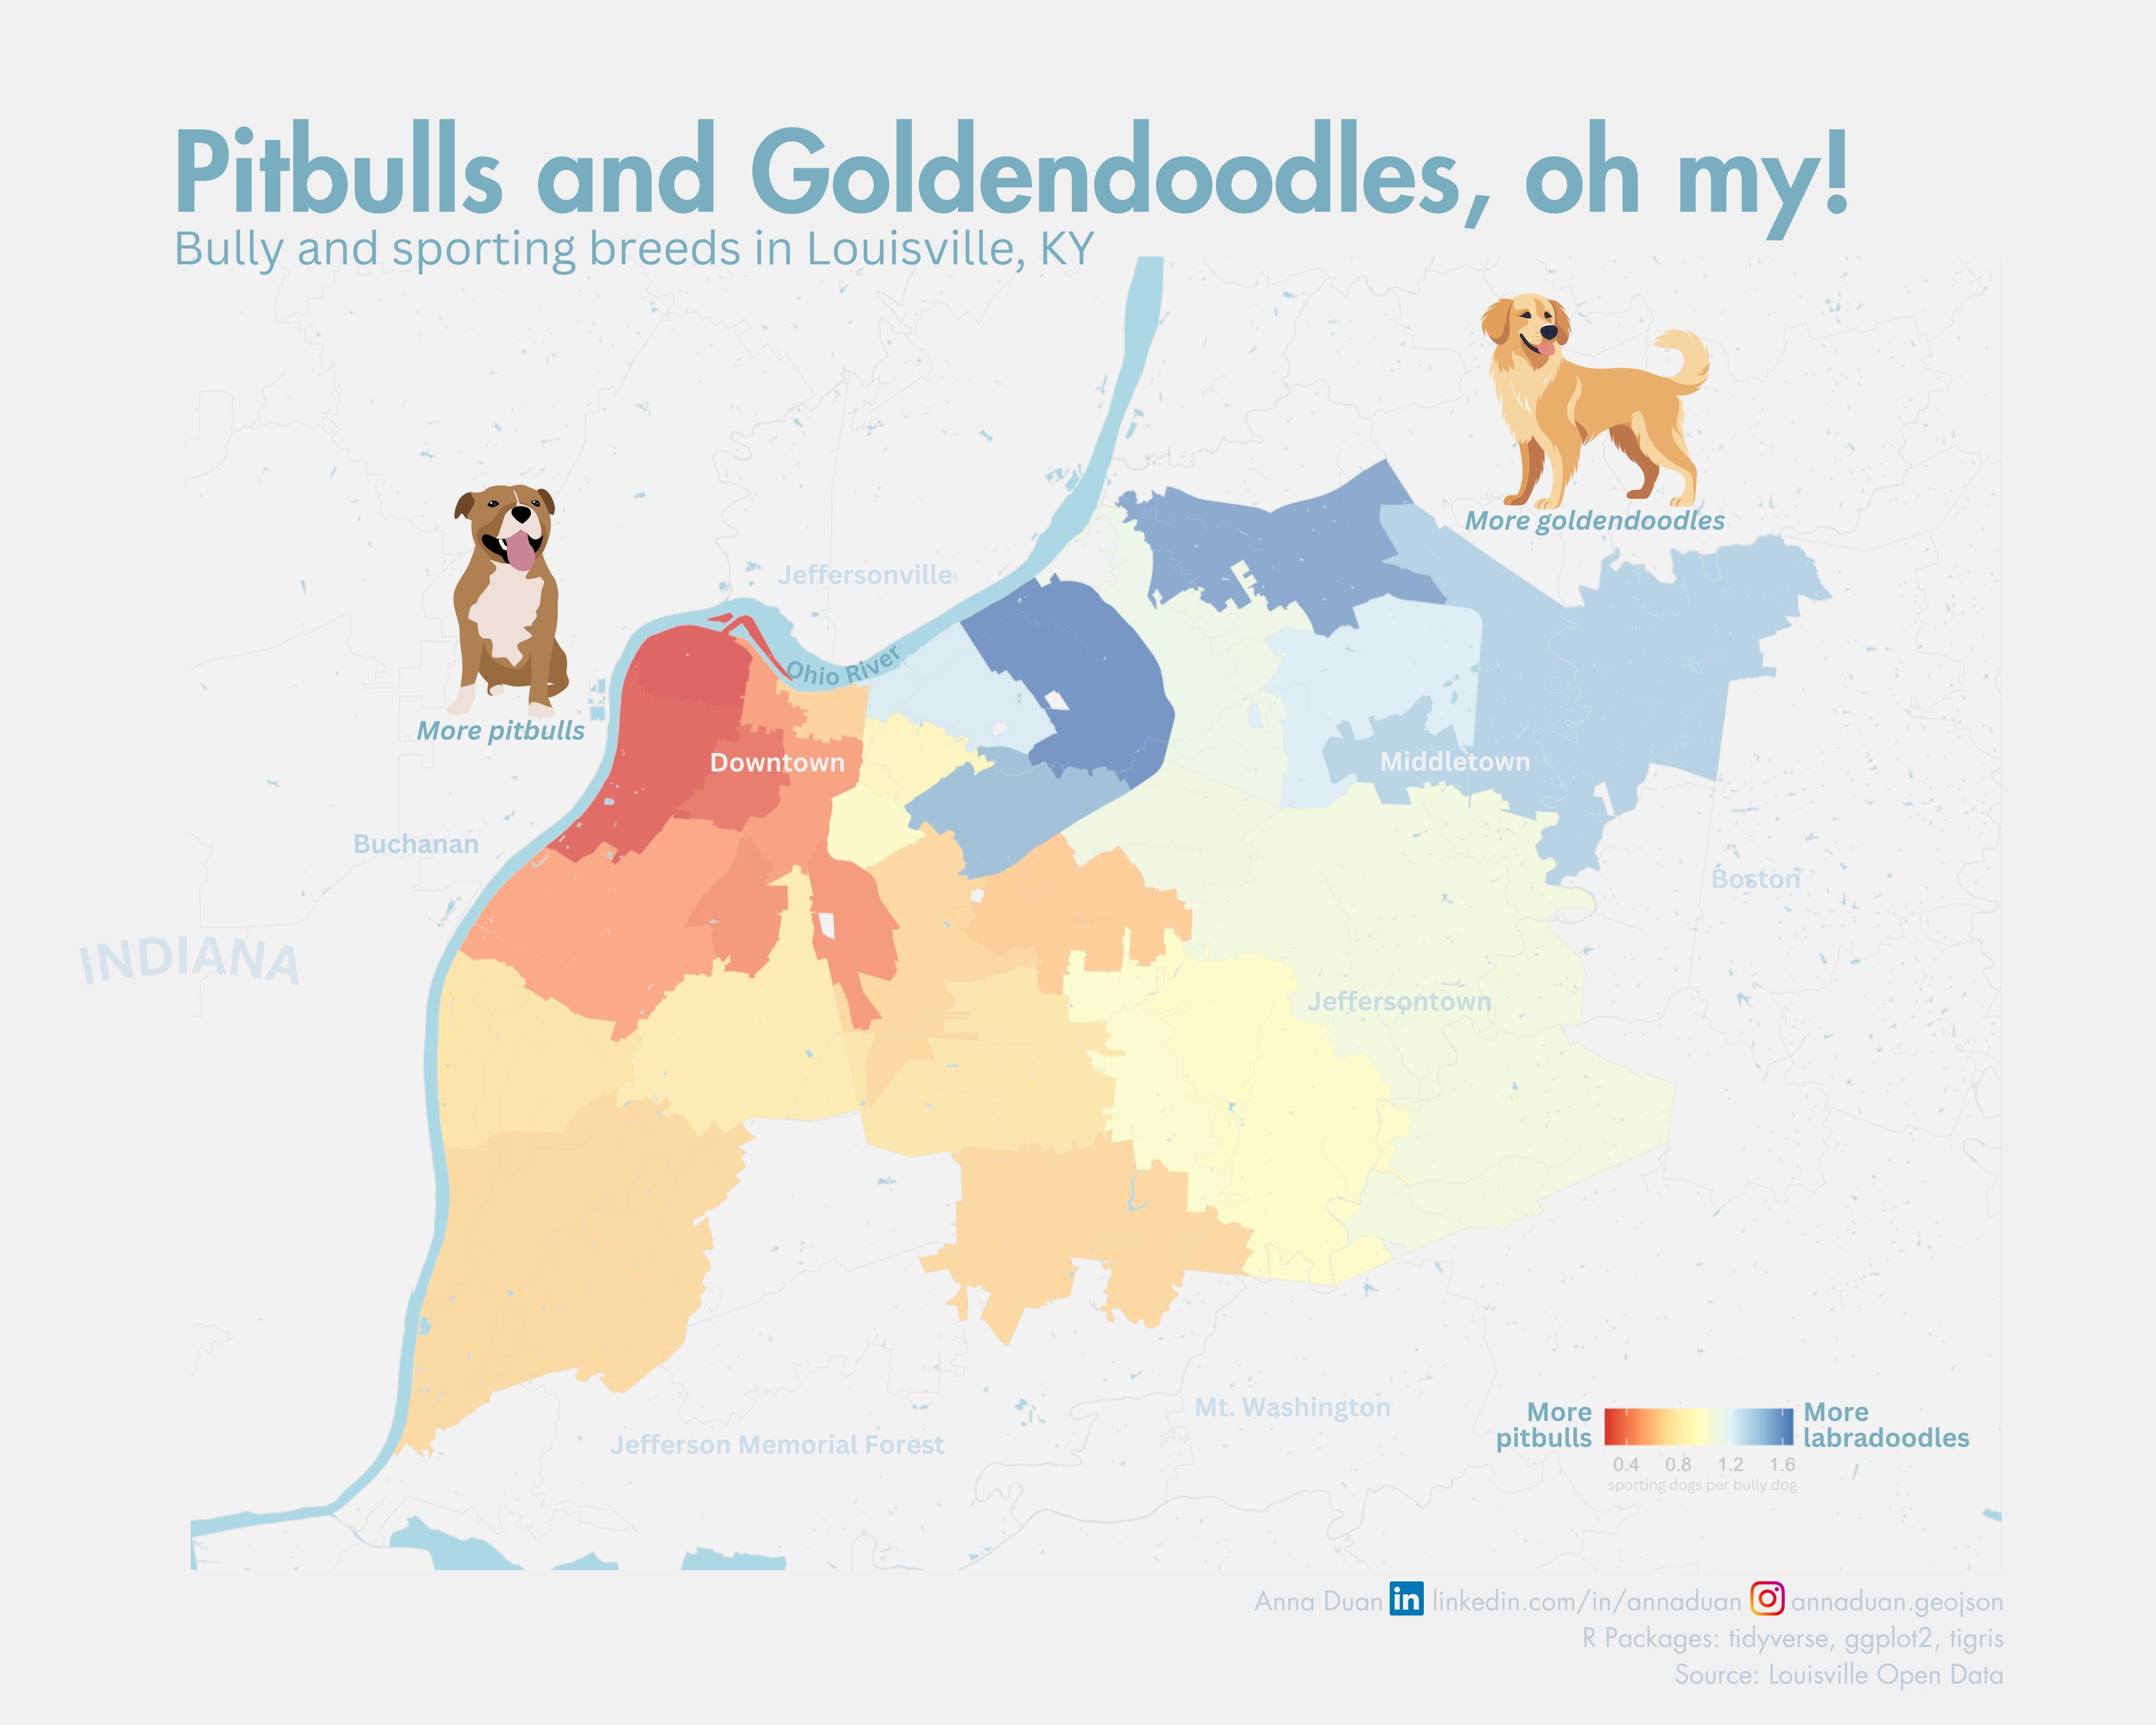 Pitbulls and Goldendoodles, oh my! by Anna Duan